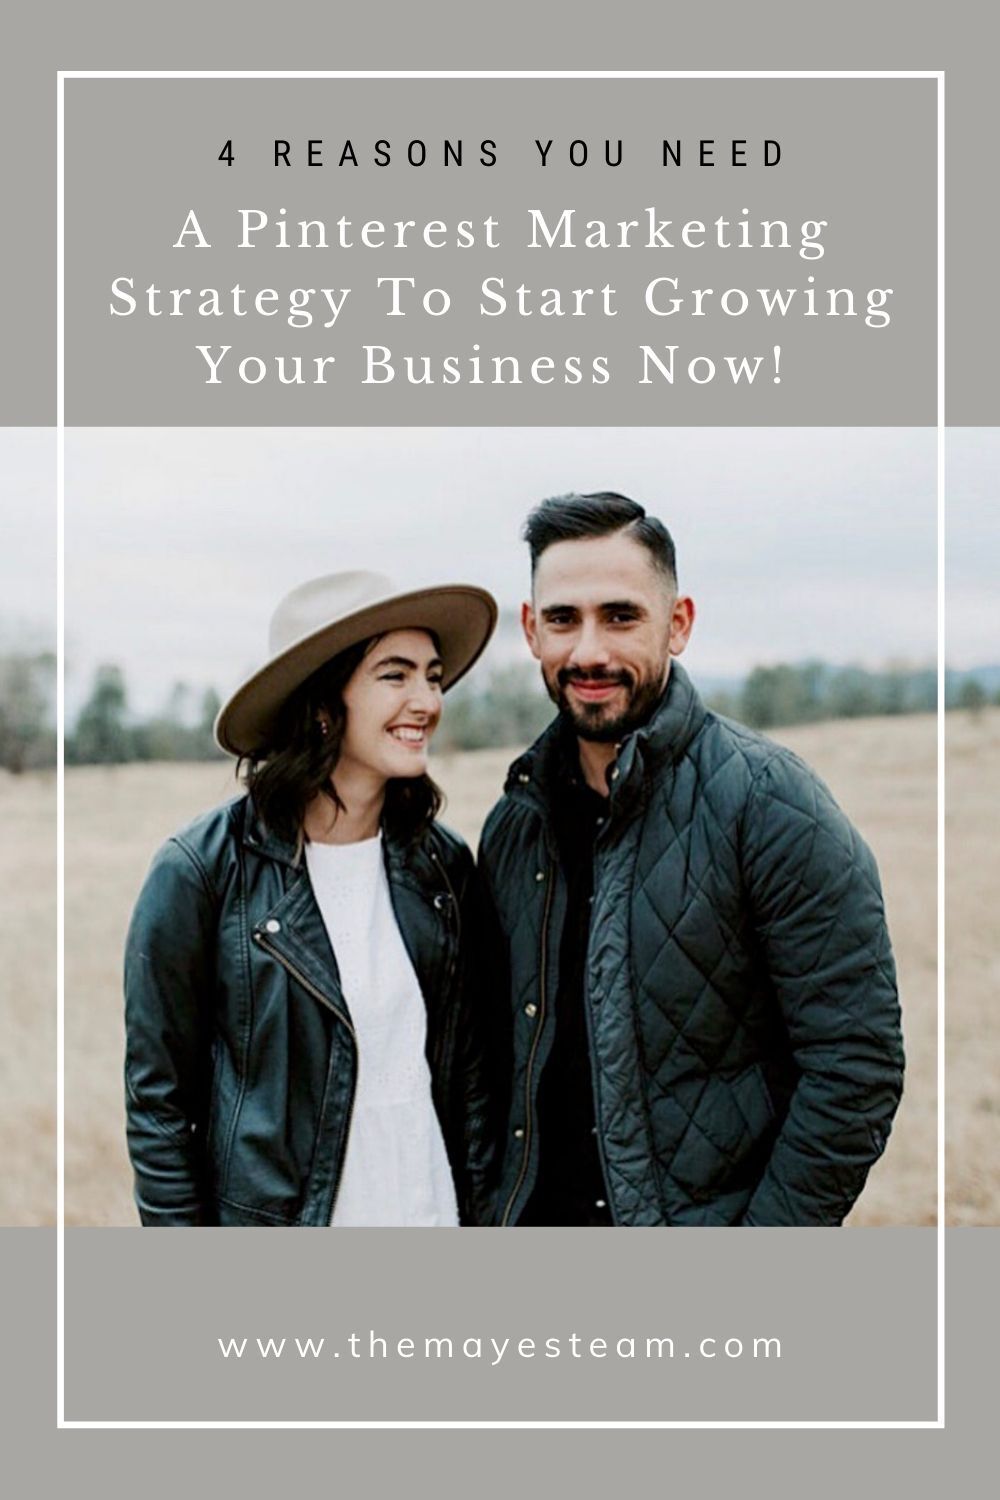 An image of Gabriel & Debbie Mayes smiling overlaid with text that reads A Pinterest Marketing Strategy To Start Growing Your Business Now!